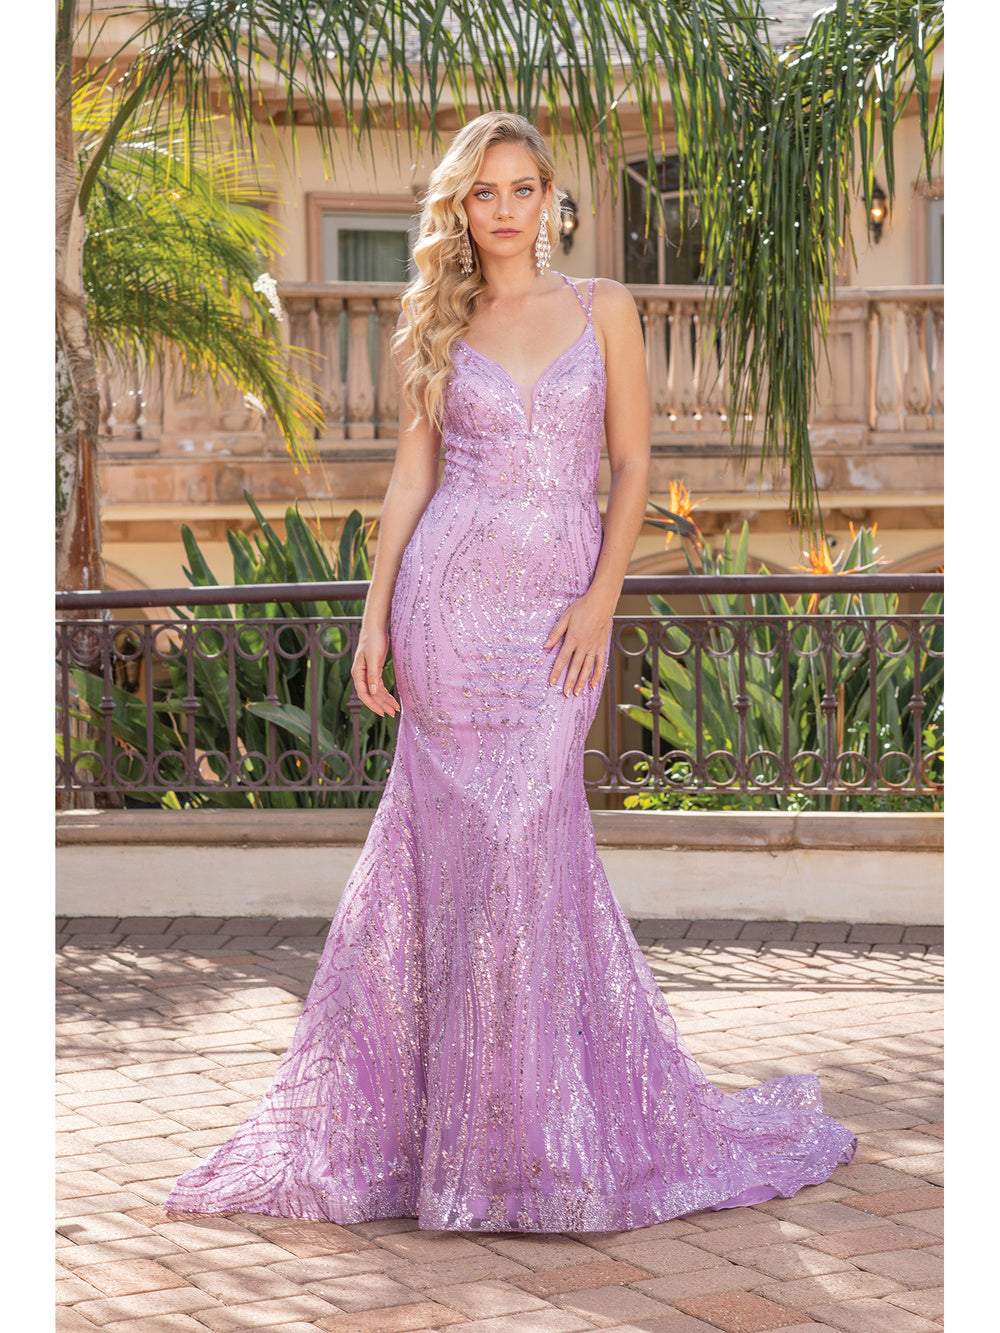 DQ 4337 - Glitter Pattern Fit & Flare Prom Gown with Corset Back PROM GOWN Dancing Queen XS LILAC 